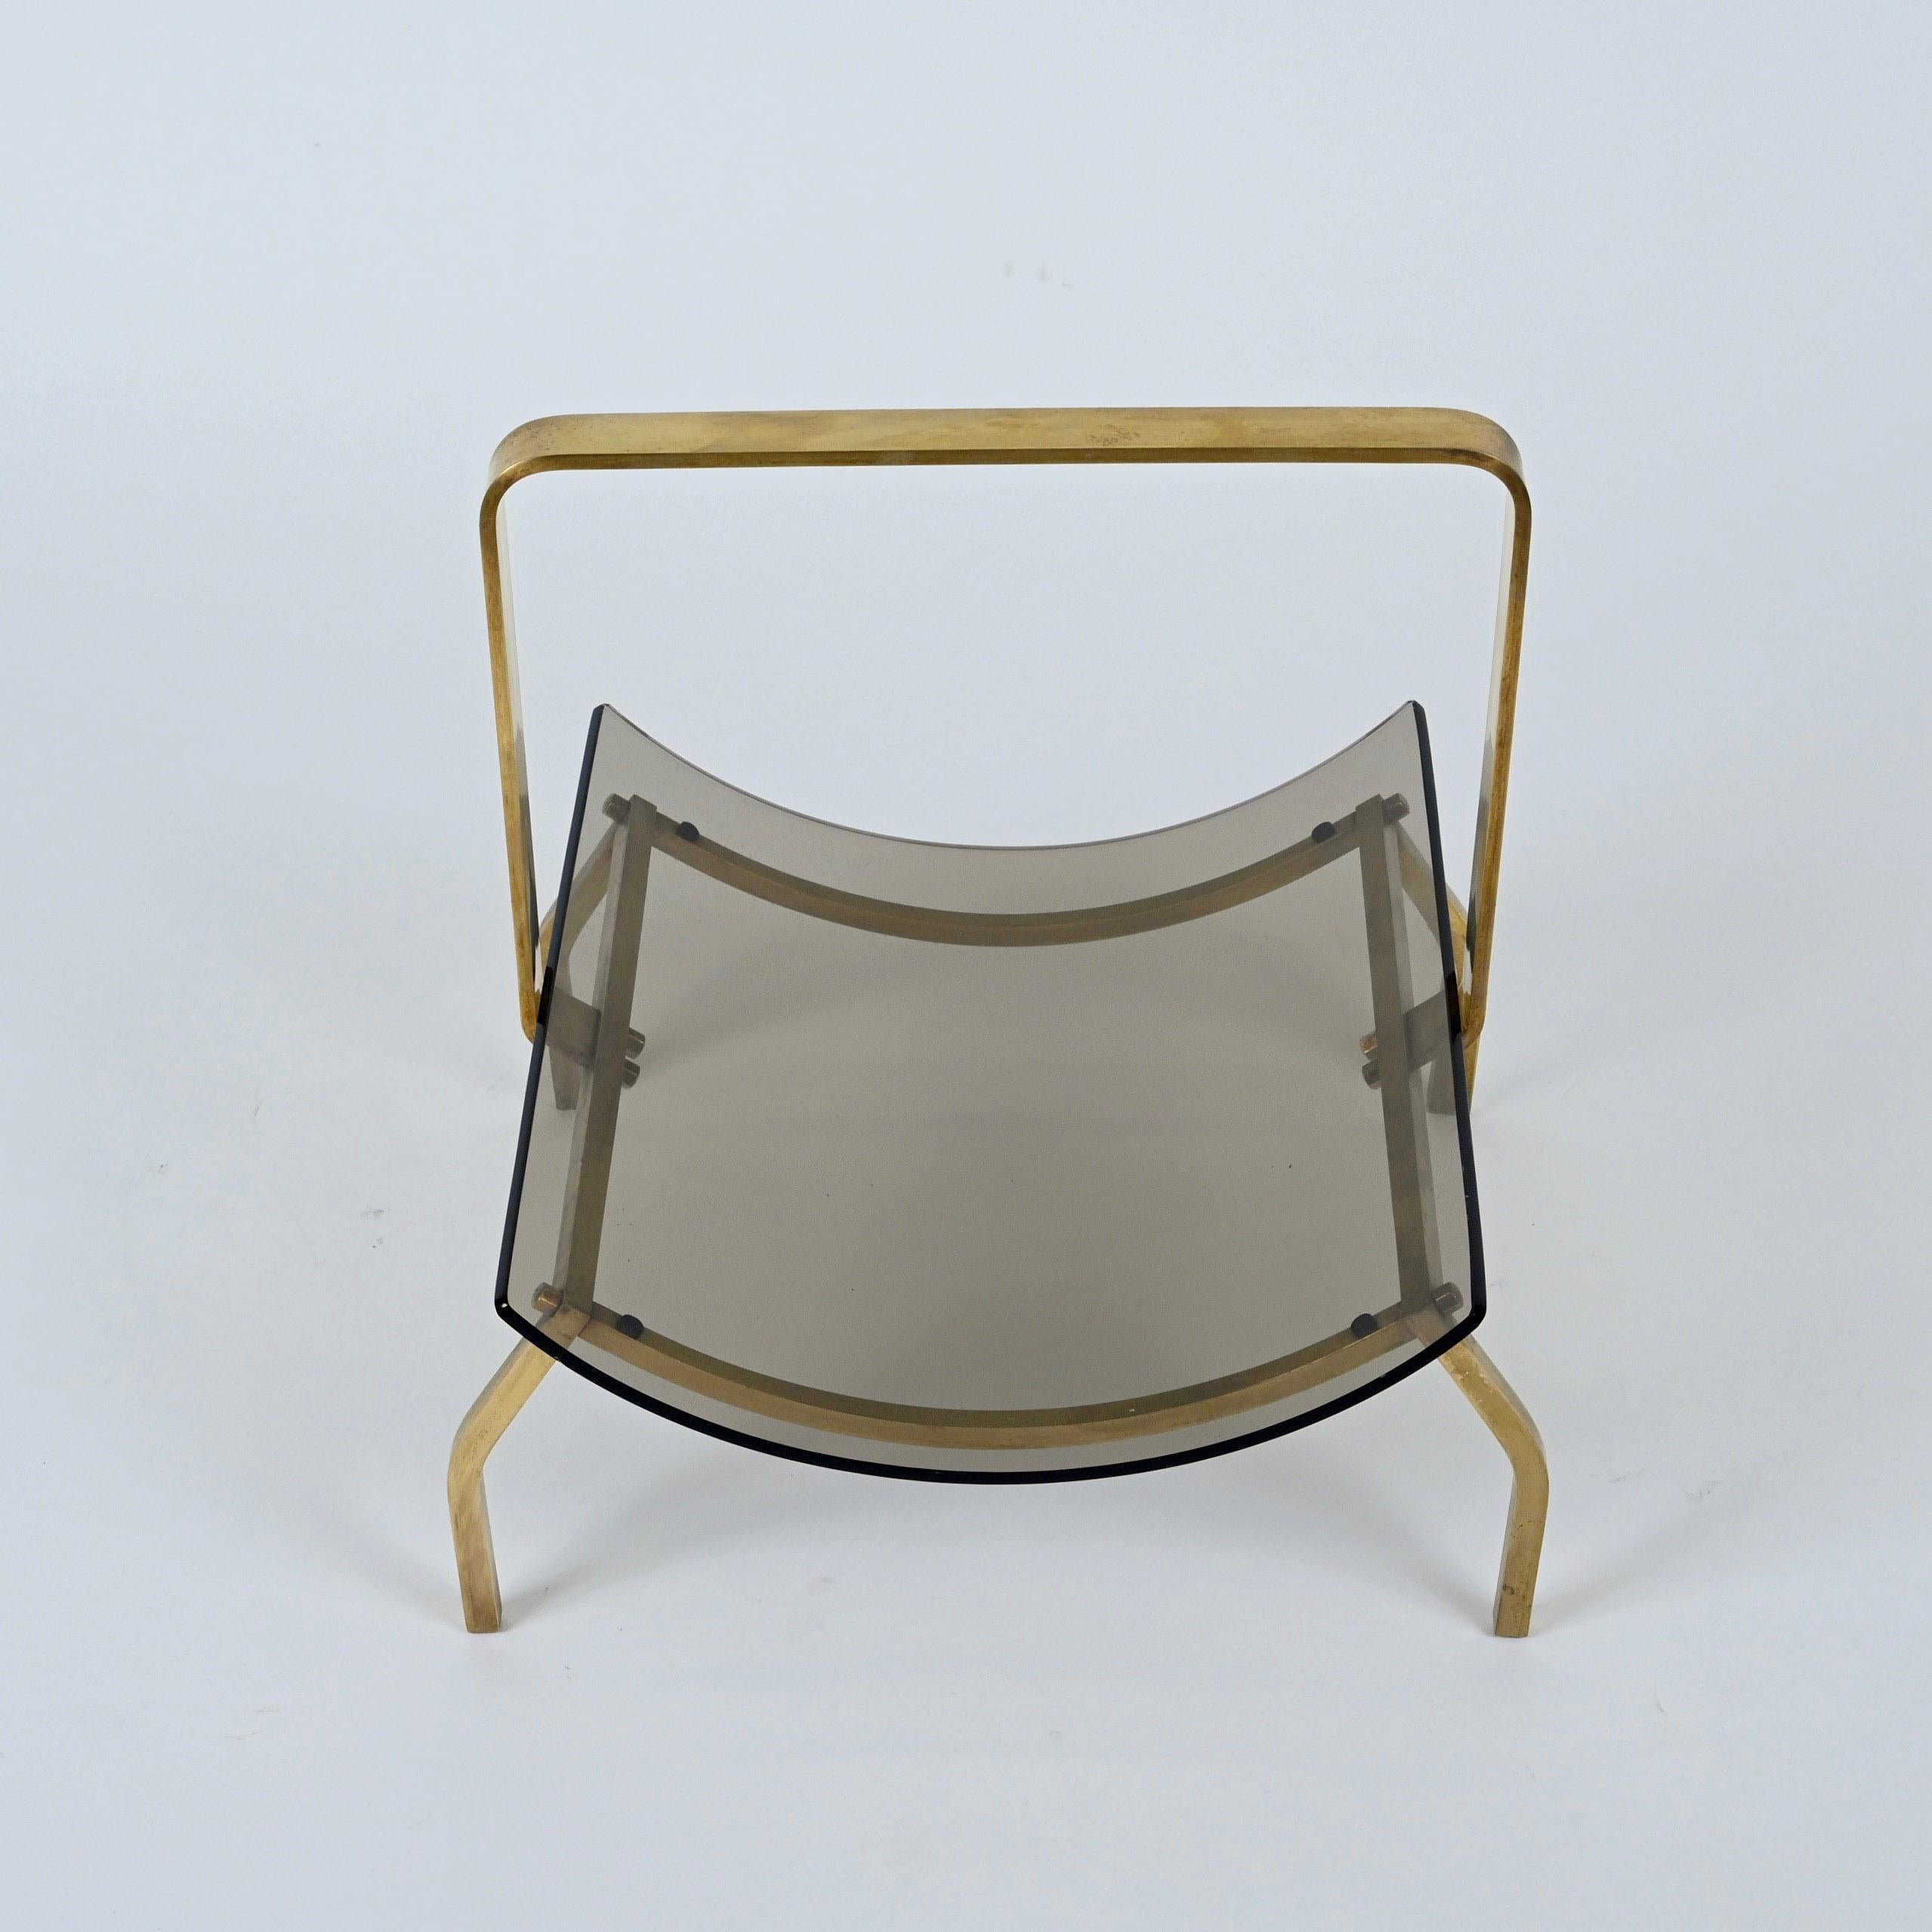 Midcentury Fontana Arte Brass and Smoked Glass Magazine Rack Stand, 1960s, Italy For Sale 13